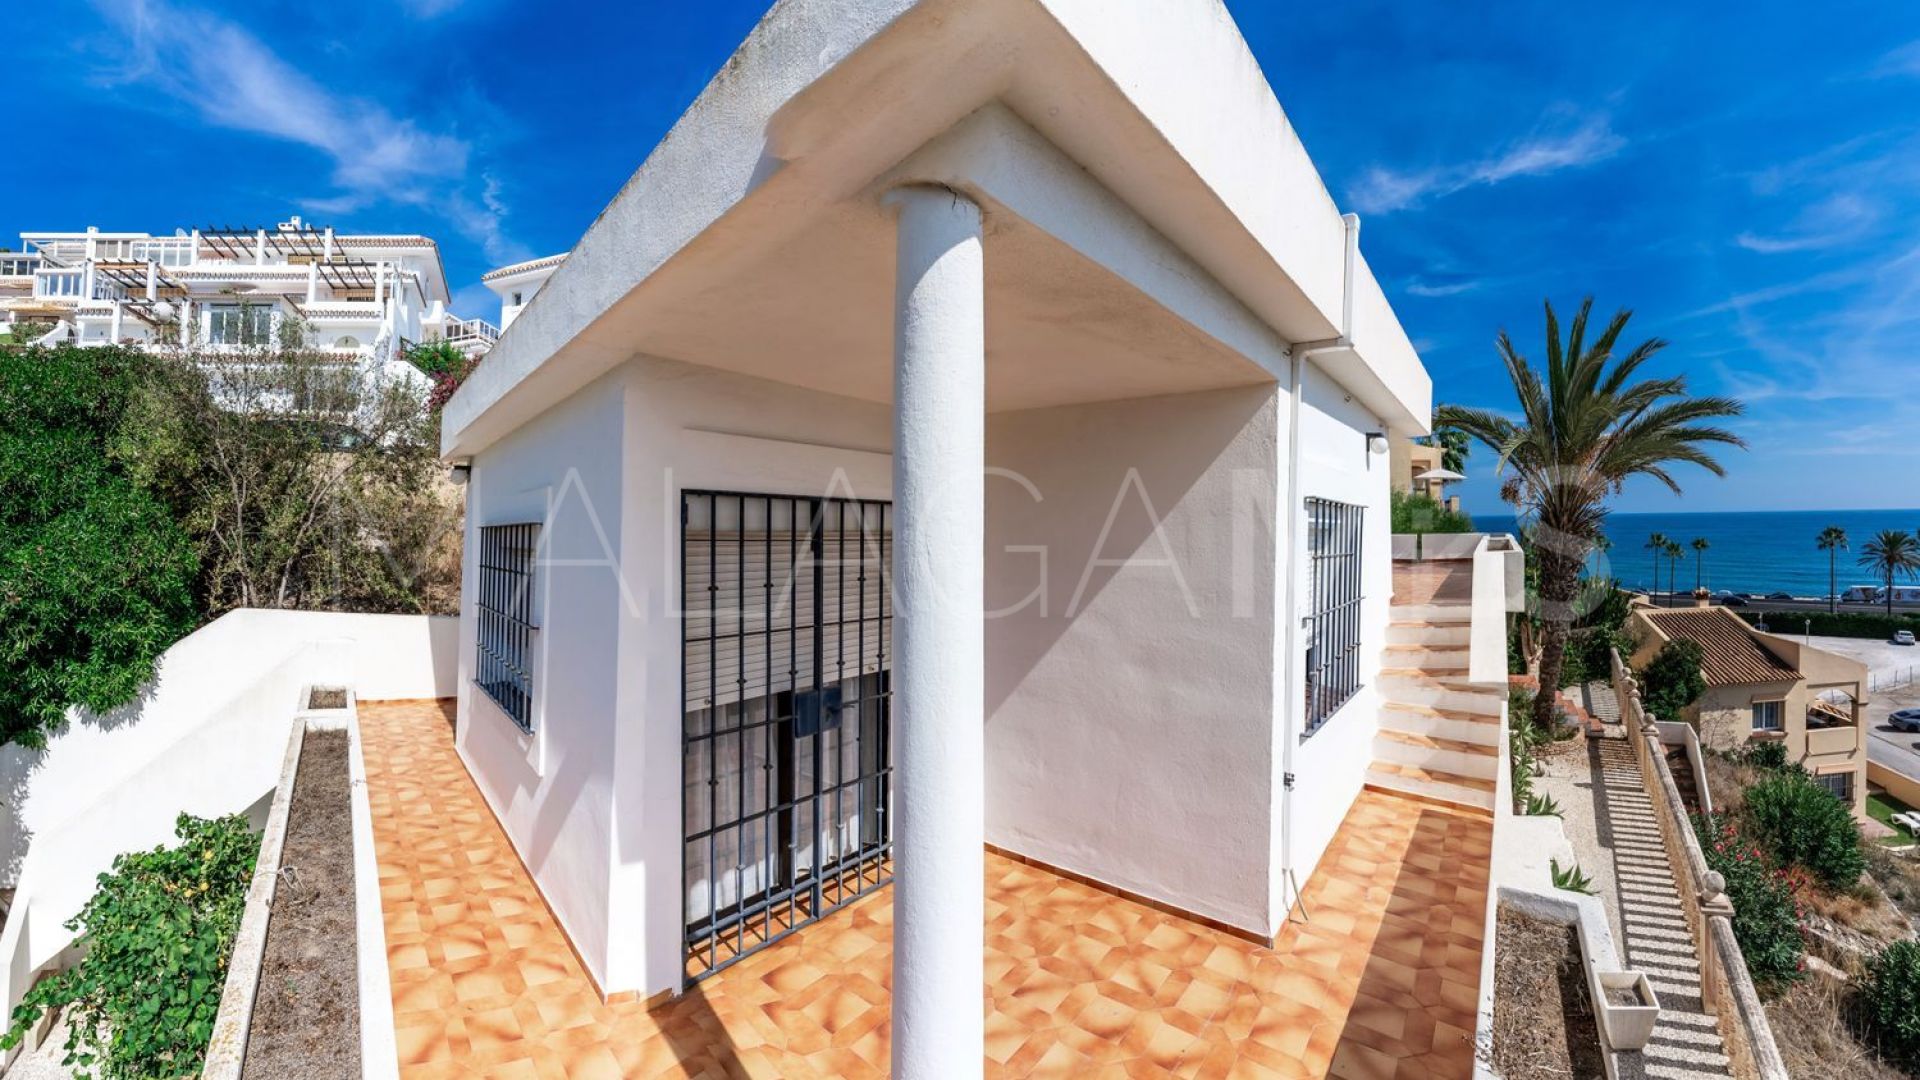 3 bedrooms house for sale in El Chaparral